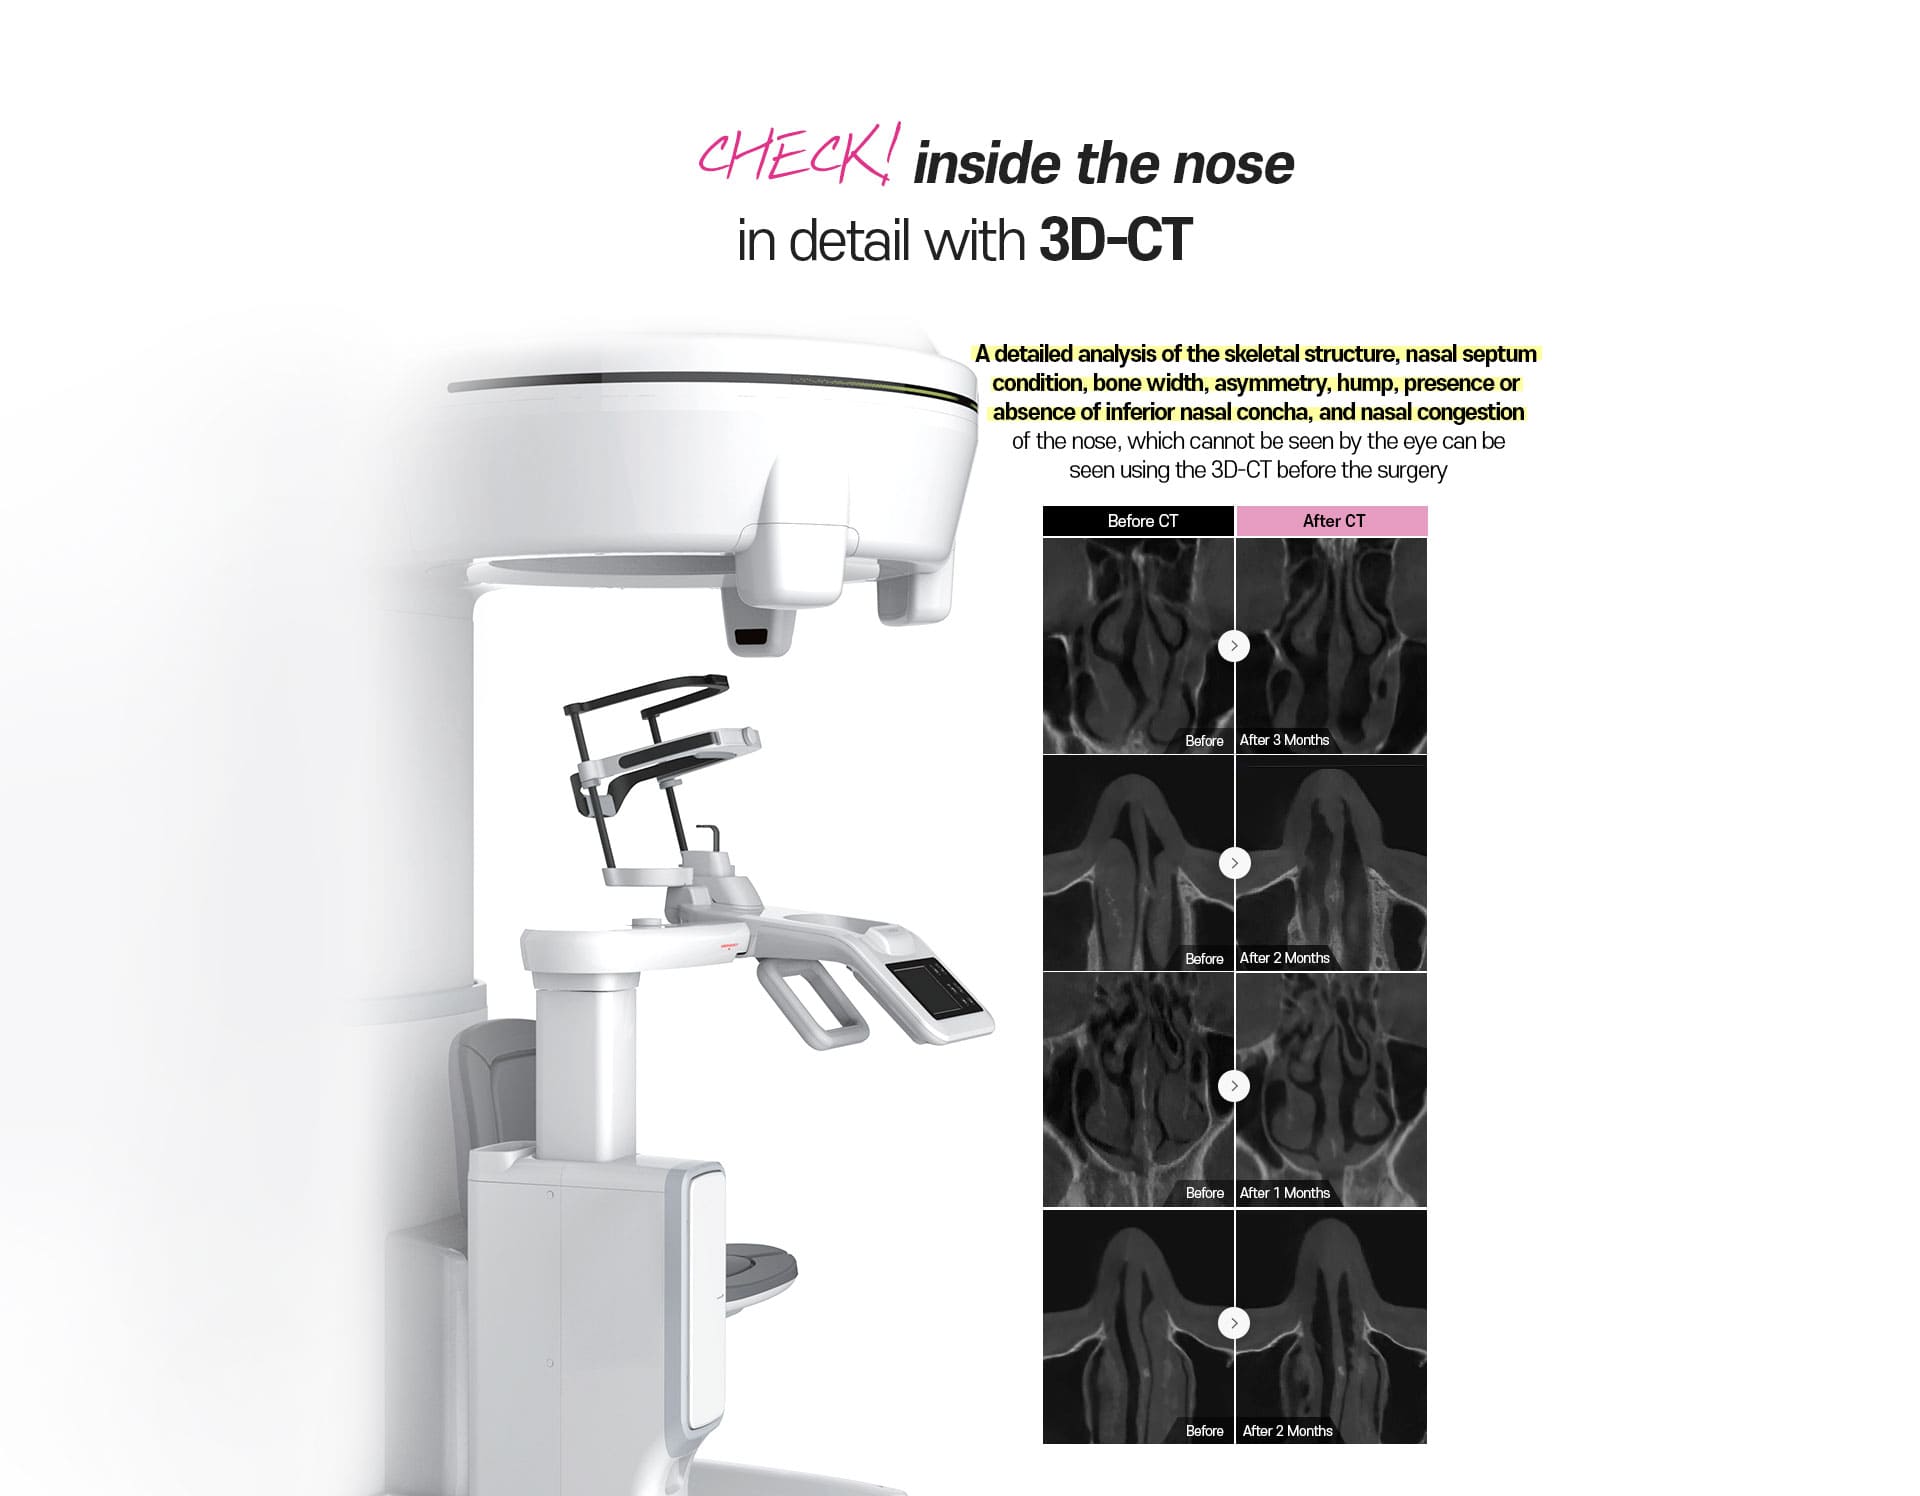 Check inside the nose in detail with 3D-CT